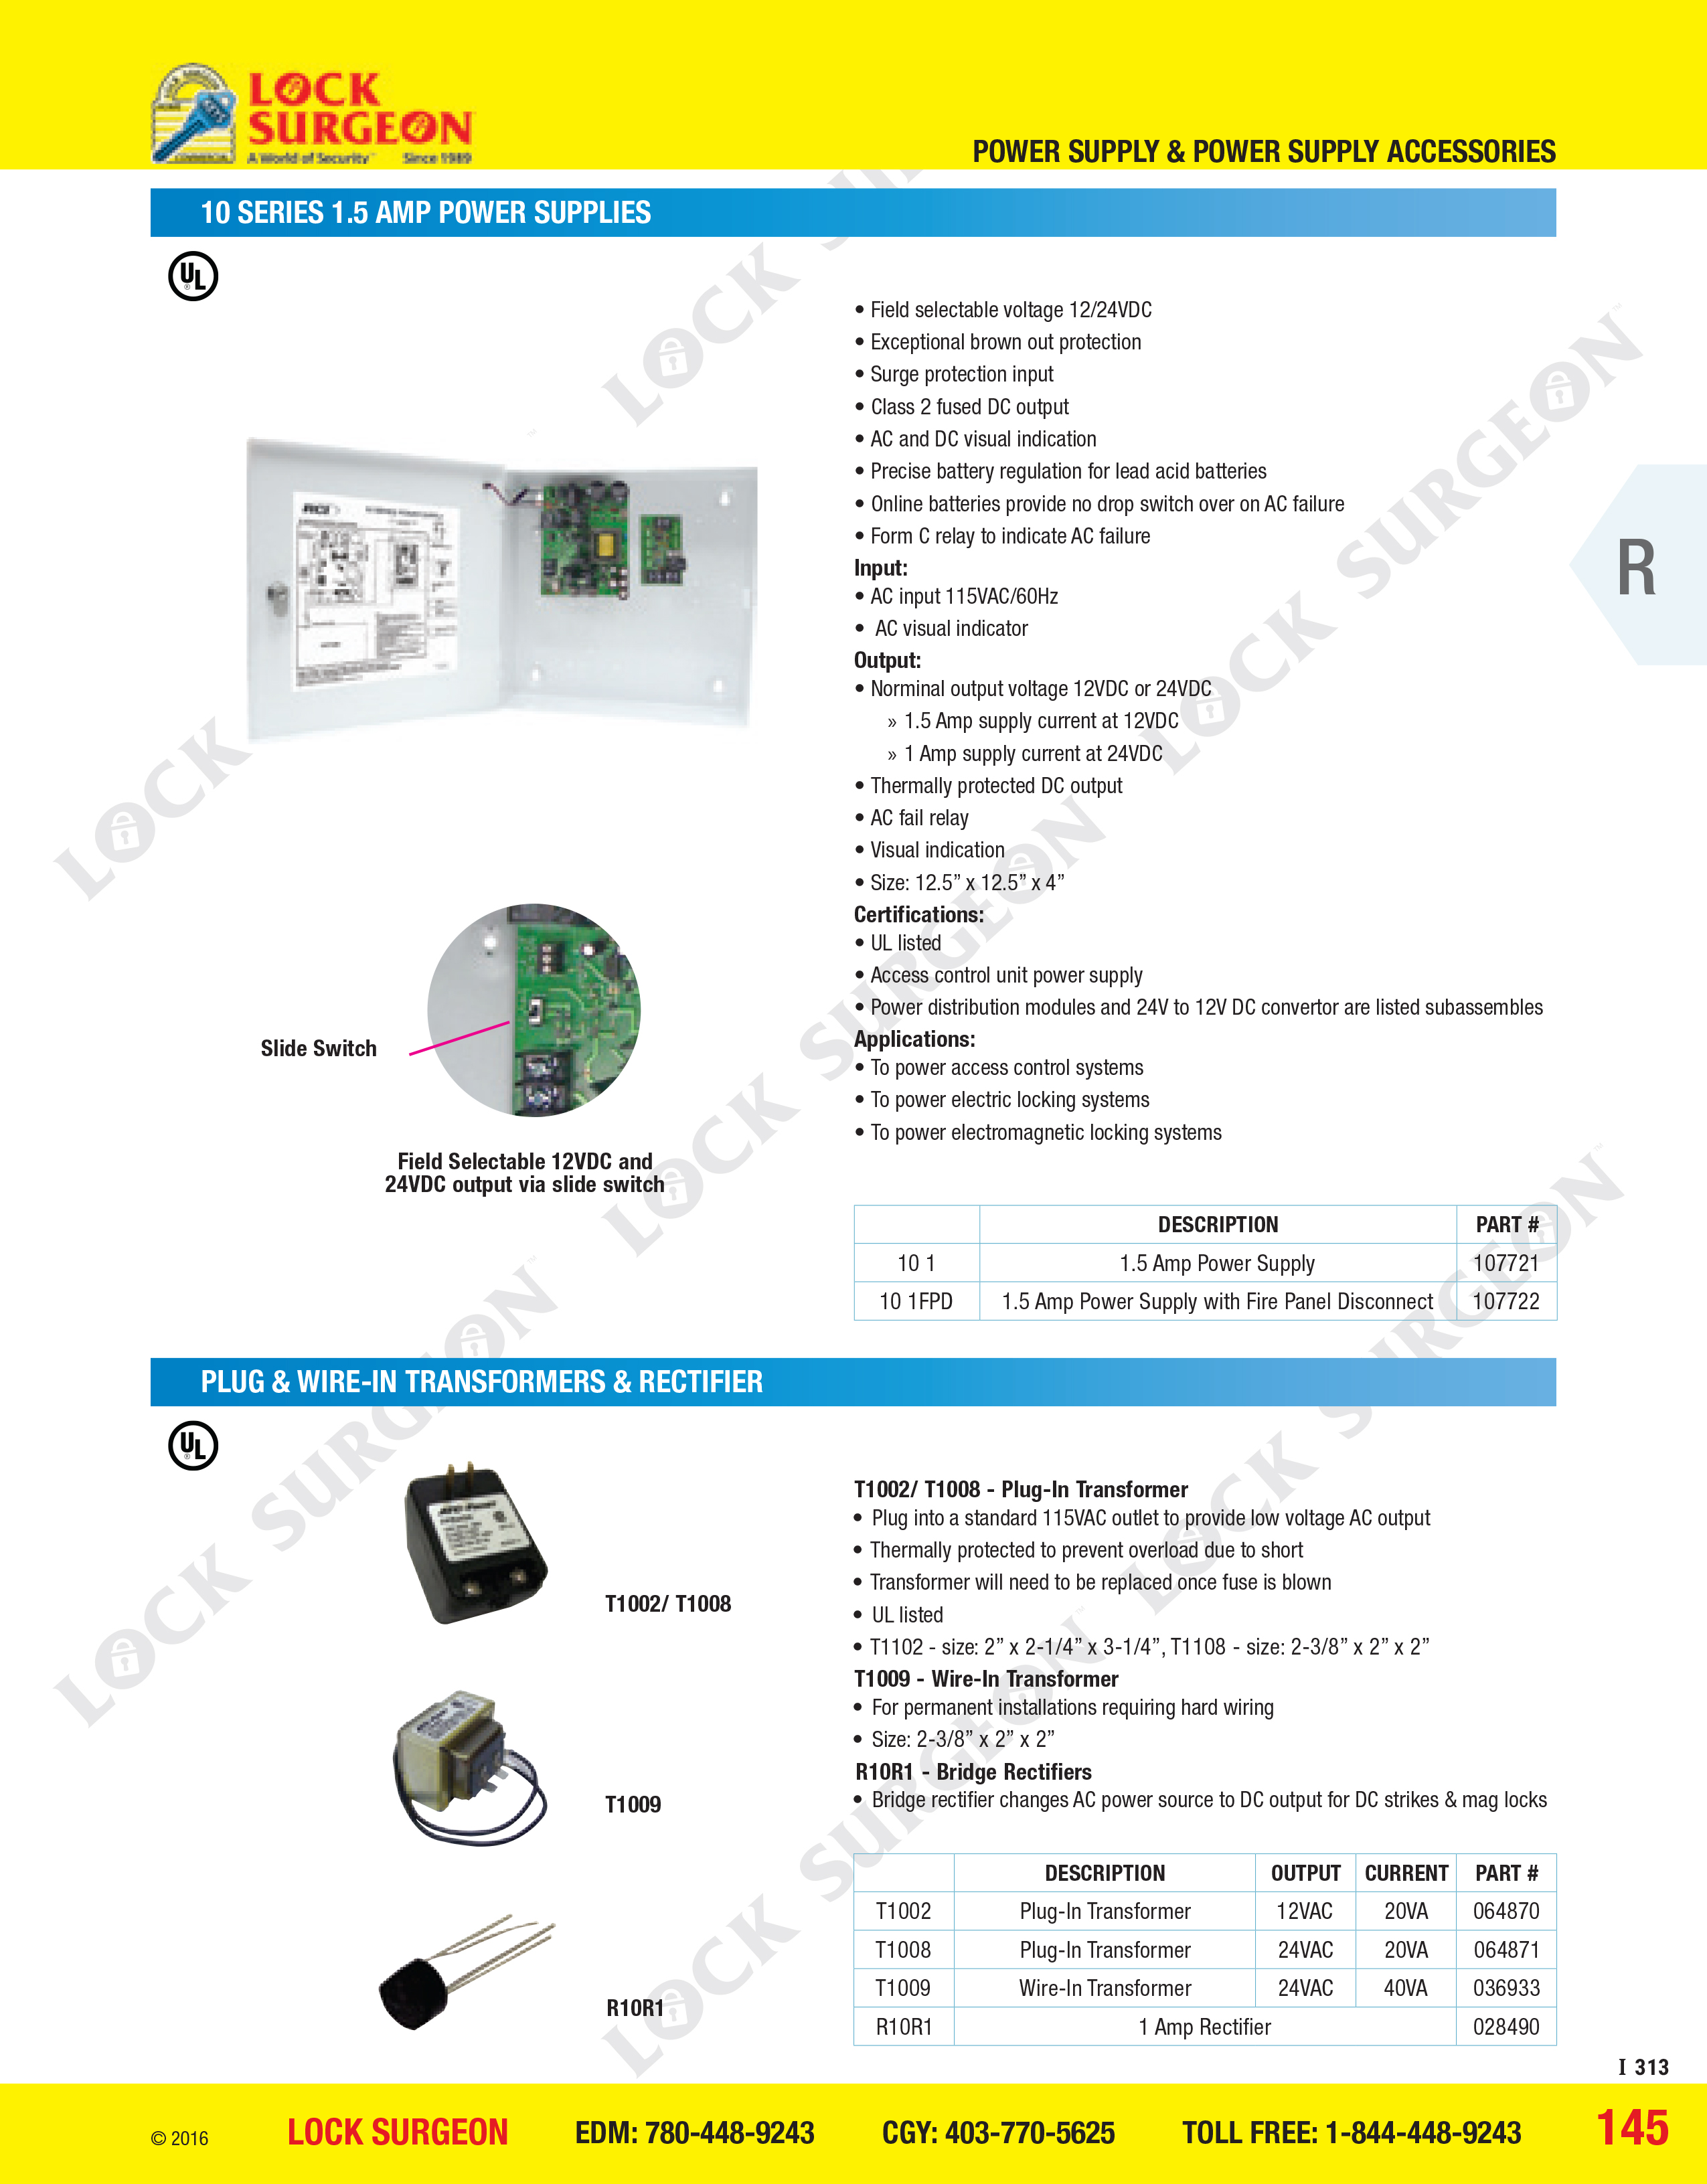 10 Series 1.5 AMP power supplies and accessories, plug, wire-in transformers, rectifier